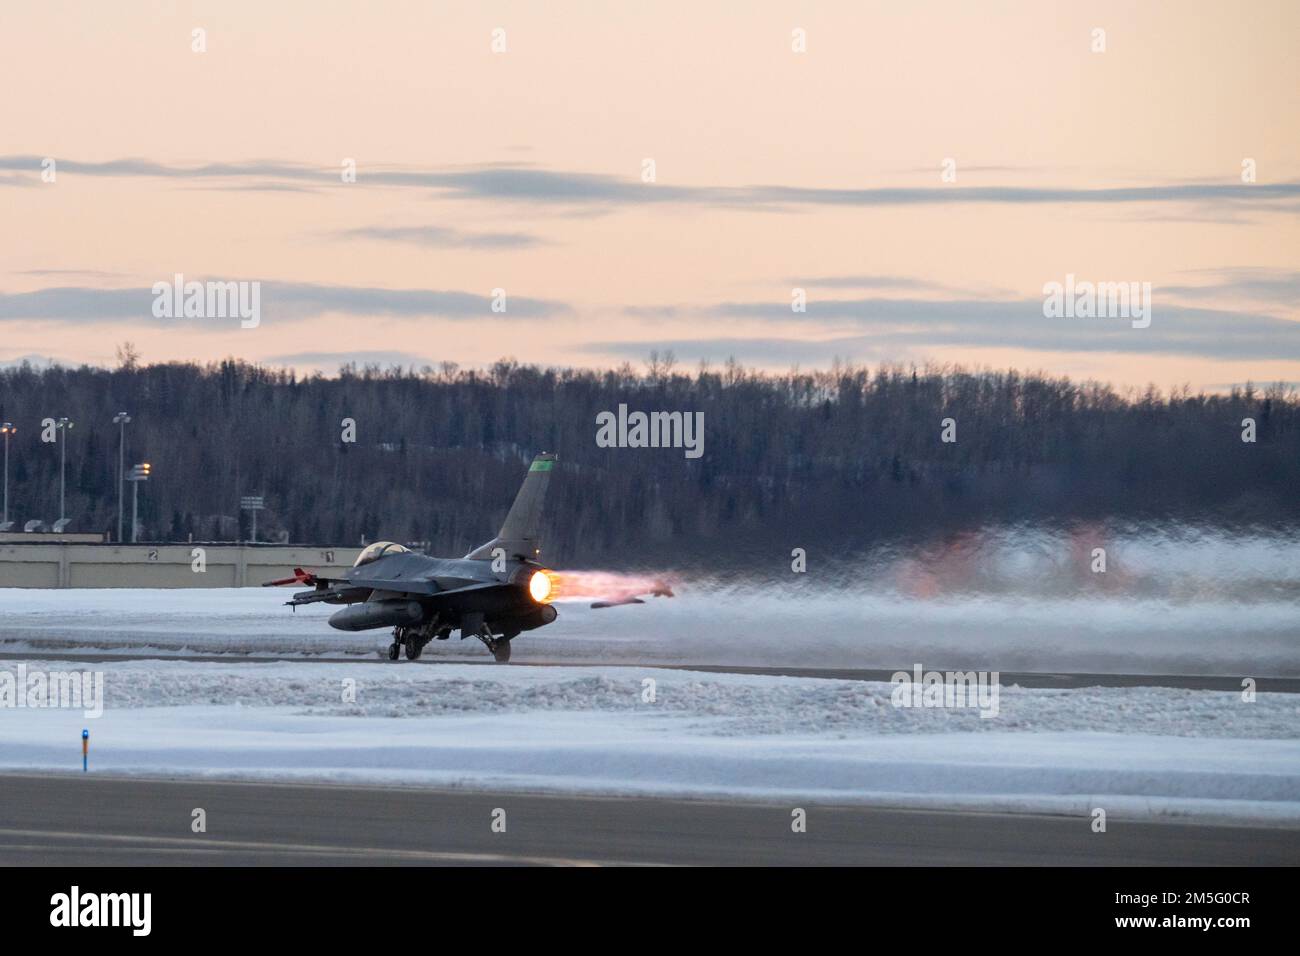 A U.S. Air Force F-16 Fighting Falcon, Assigned to the Ohio National Guard’s 180th Fighter Wing, takes off for a training flight at Joint Base Elmendorf-Richardson, Alaska, during U.S. Northern Command Exercise ARCTIC EDGE 2022, March 15, 2022. AE22 is a biennial homeland defense exercise designed for U.S. and Canadian Armed Forces to demonstrate and exercise a joint capability to rapidly deploy and operate in the Arctic. Stock Photo